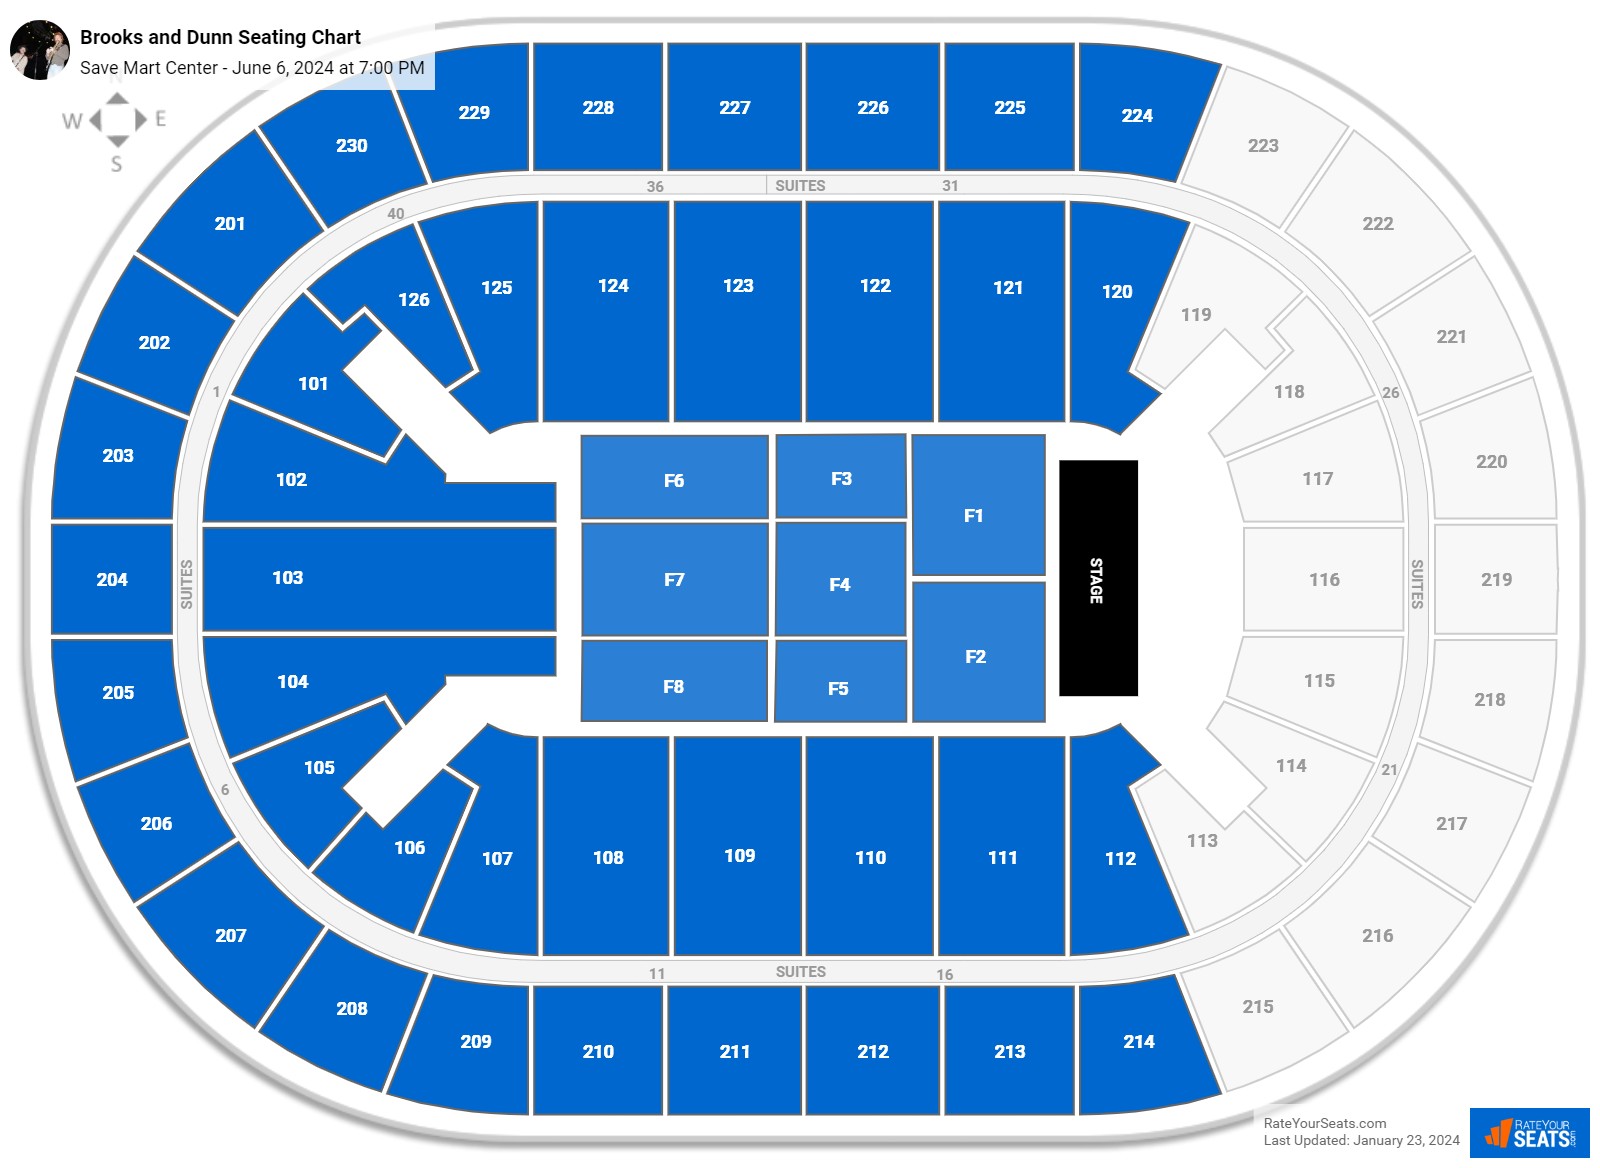 Brooks and Dunn seating chart Save Mart Center